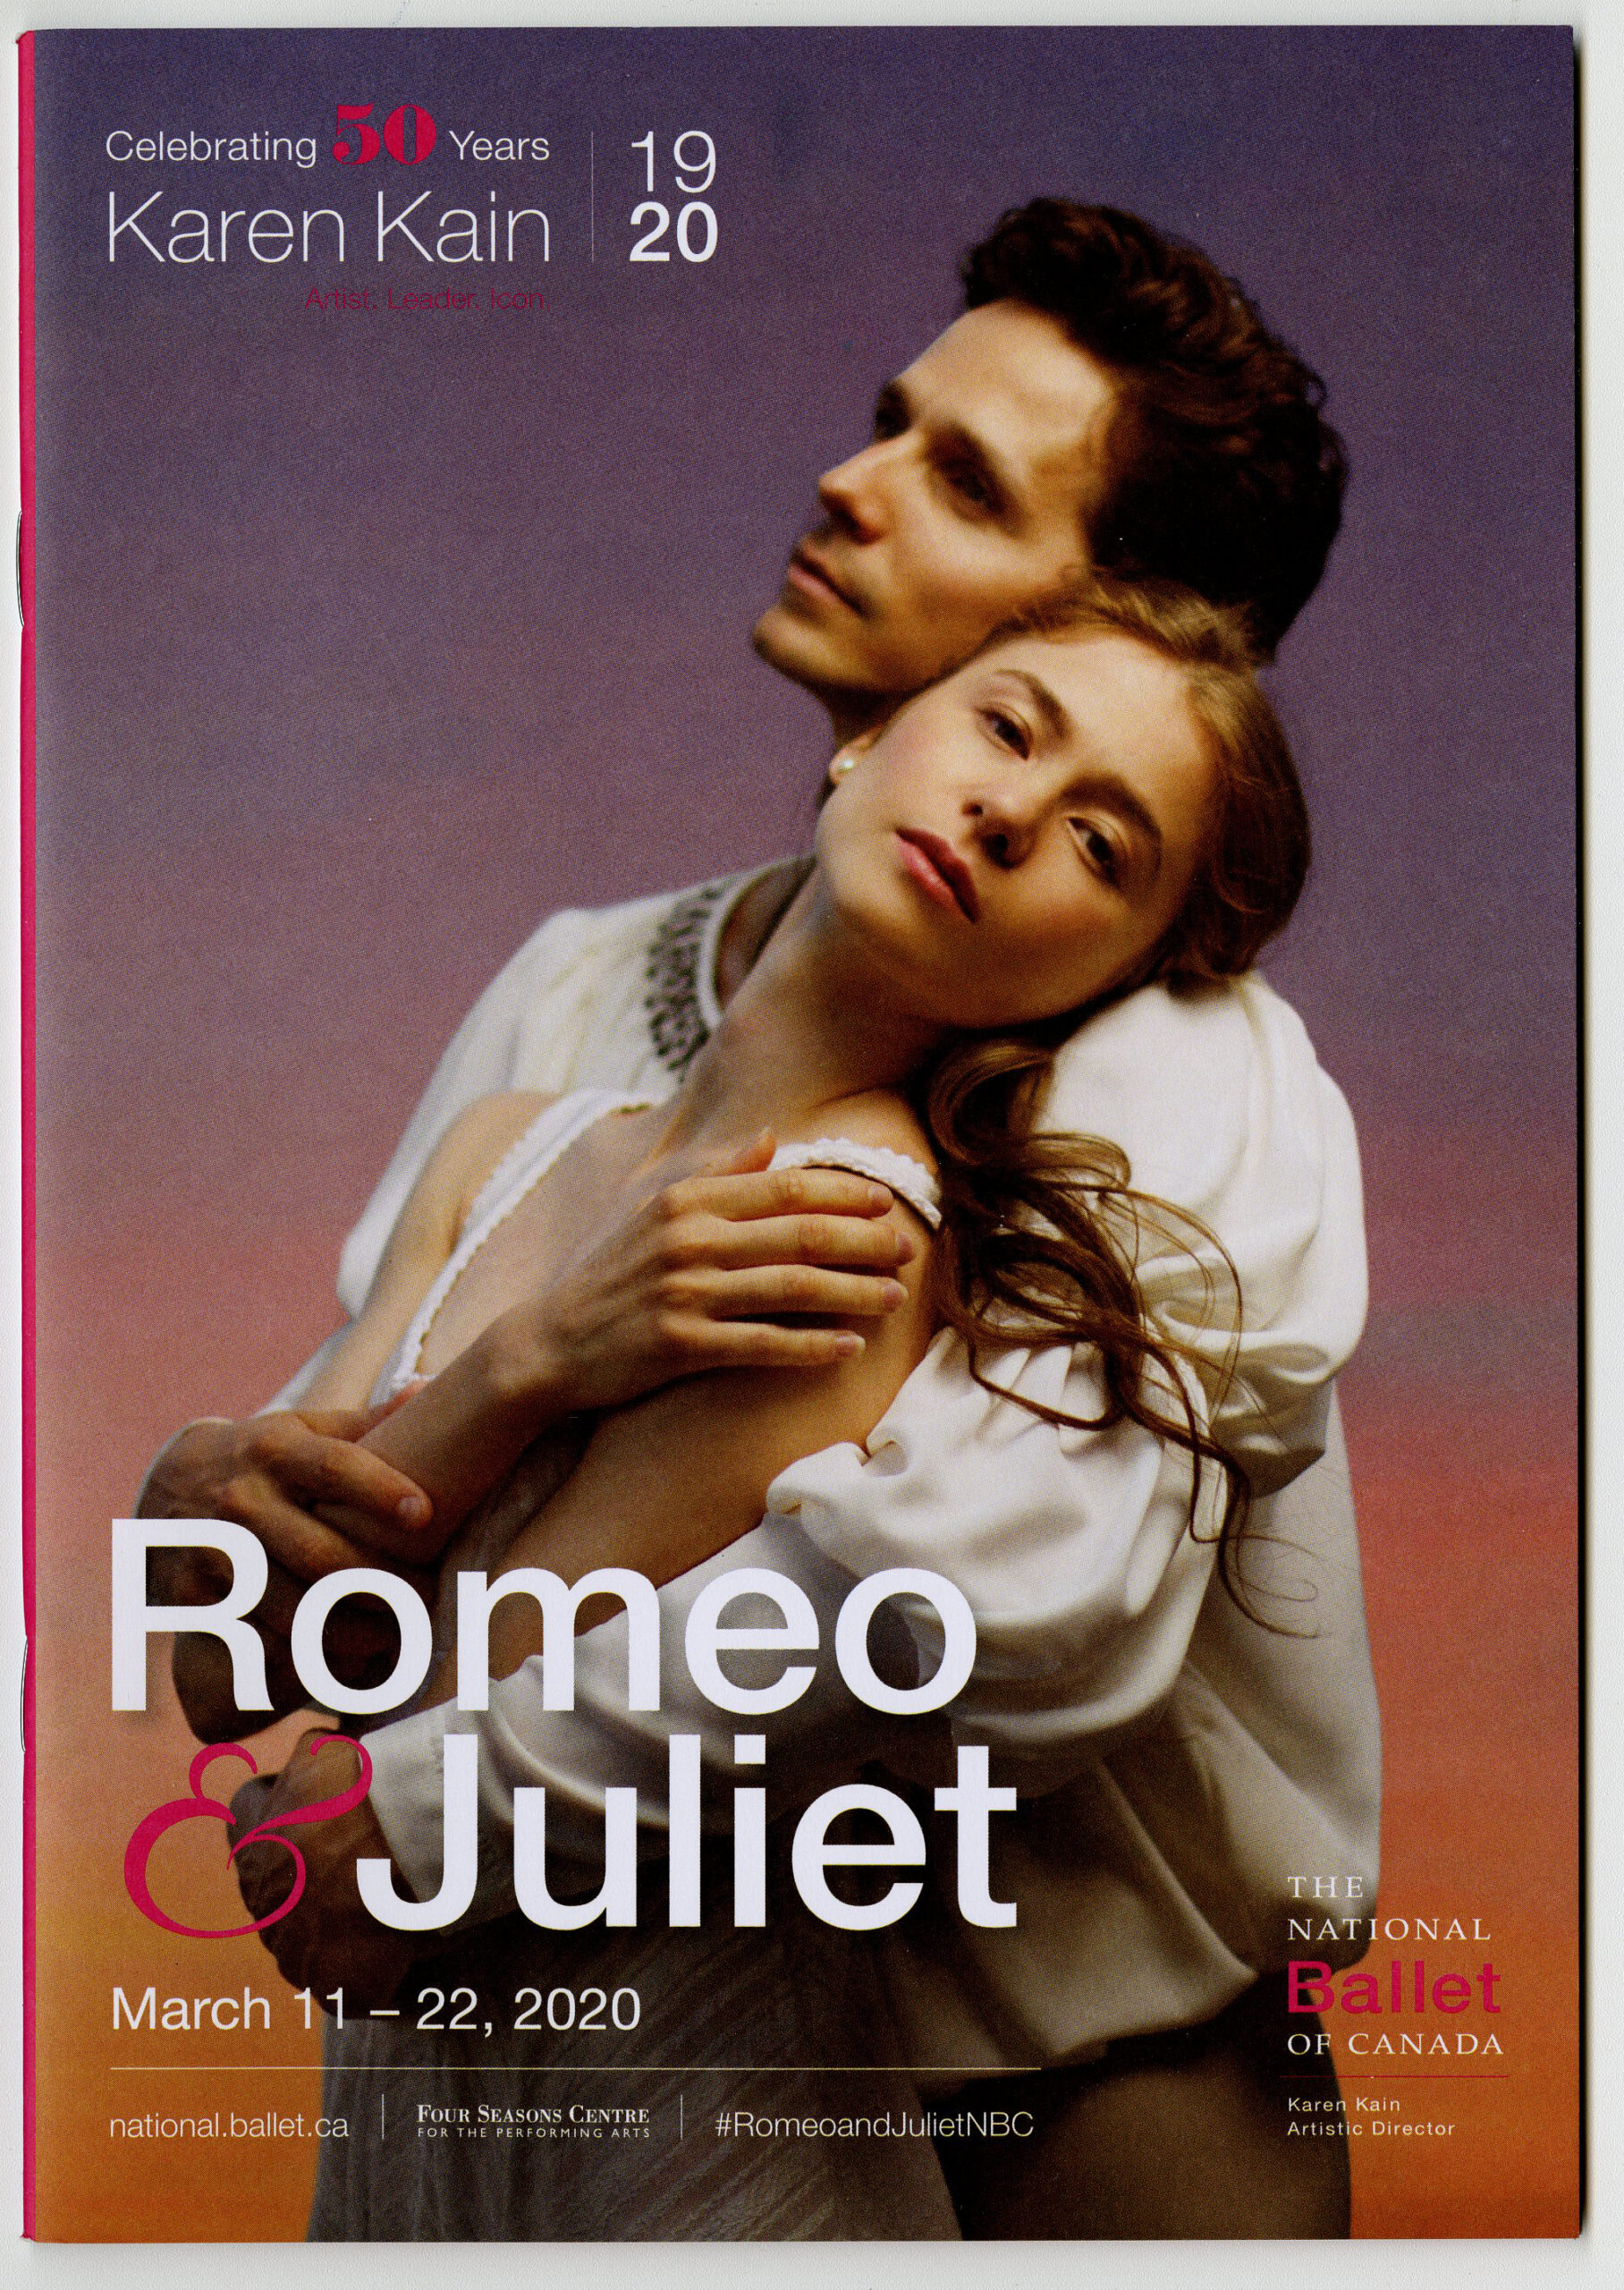 A picture of two dancers who portray Romeo and Juliet in front of the ballet's title, against a purple gradient background.